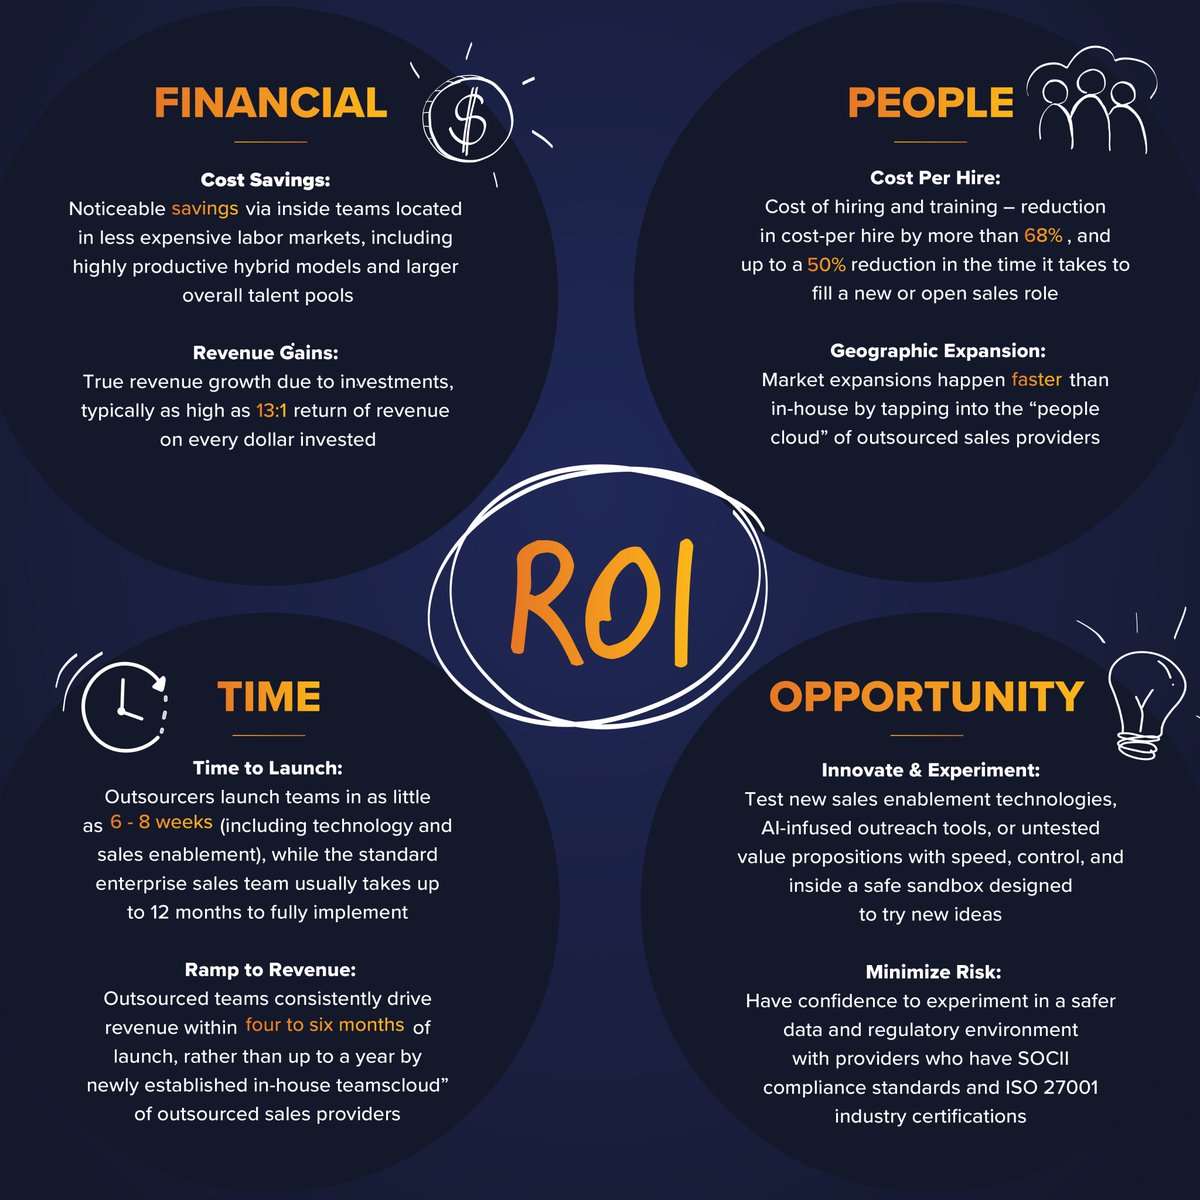 Sharpen your pencil, here’s the complete analysis of Sales Outsourcing #ROI, including the Financial, Time, People, and Opportunity returns of embedded 
 professionally managed #sales teams. How does your internal team compare? bit.ly/buyversusbuild #salestech #salesoperations